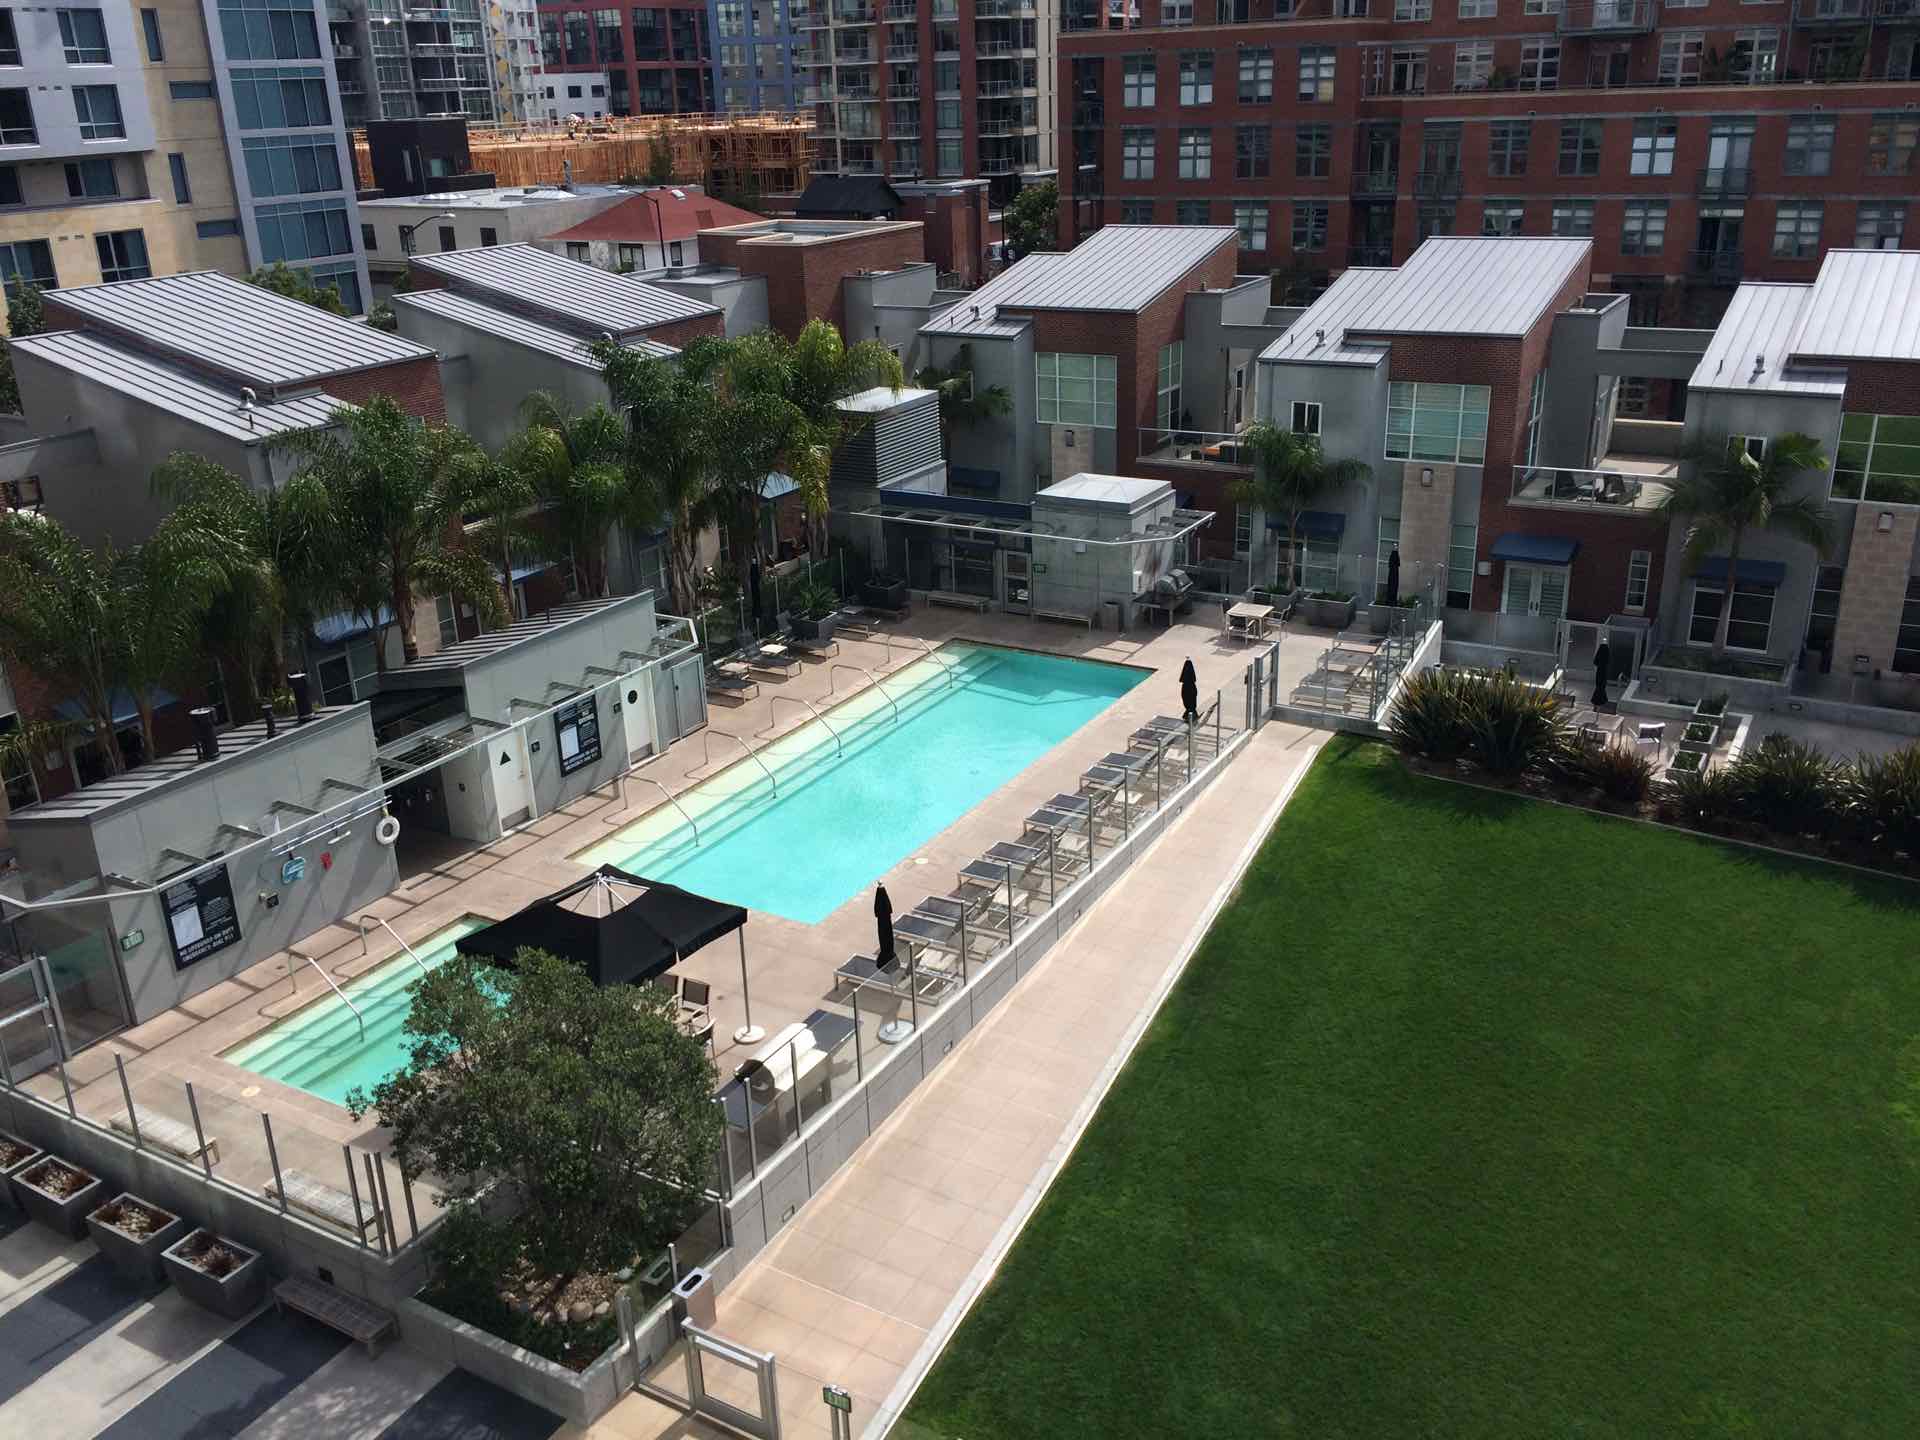 Pool deck at The Mark condo building in San Diego